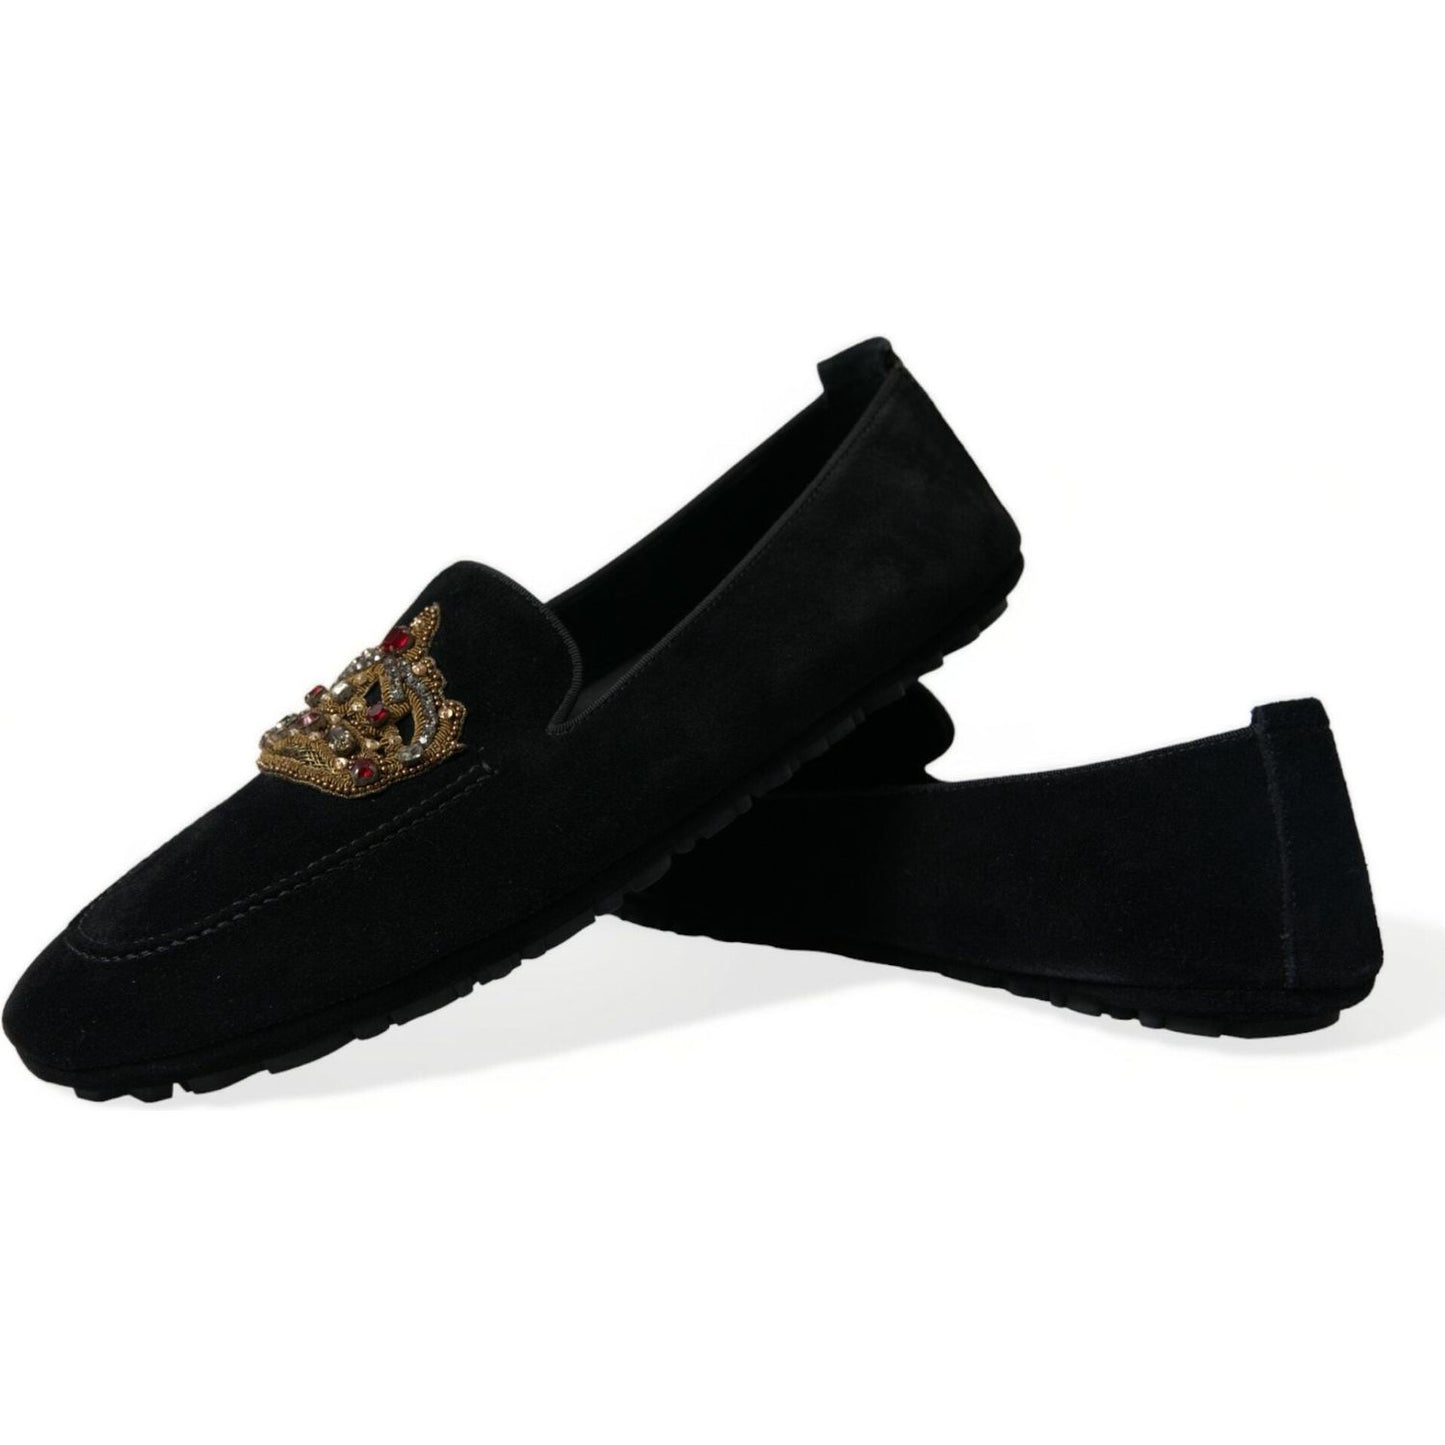 Dolce & Gabbana Black Calfskin Loafers with Crystals black-leather-crystal-crown-loafers-shoes